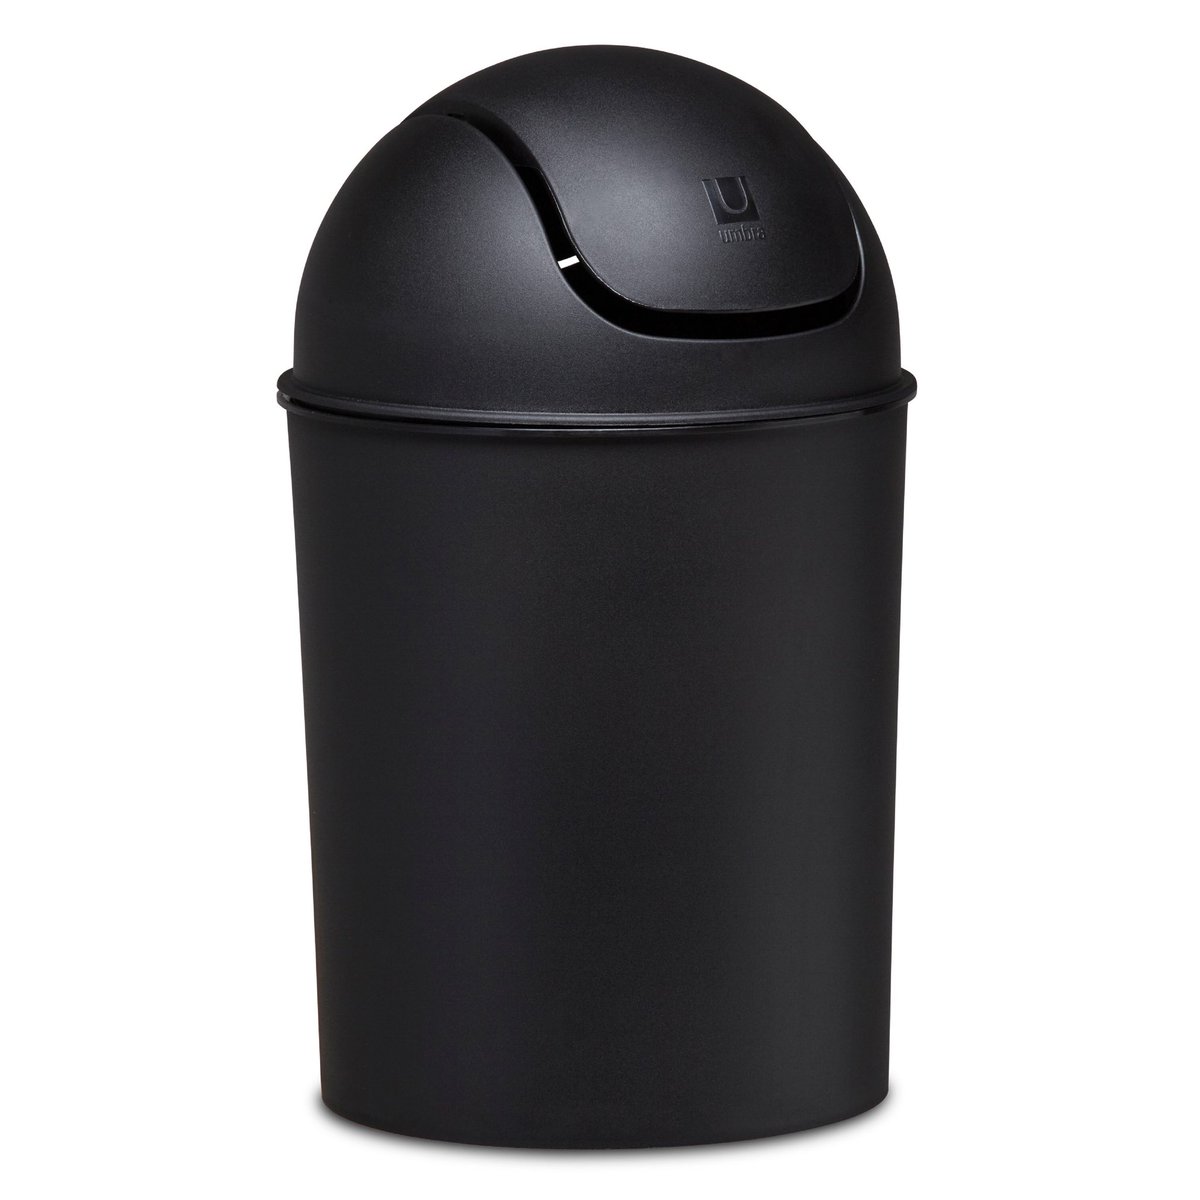 open this thread if you like uhhhh.... trash cans? yeah fuck it, trash cans.